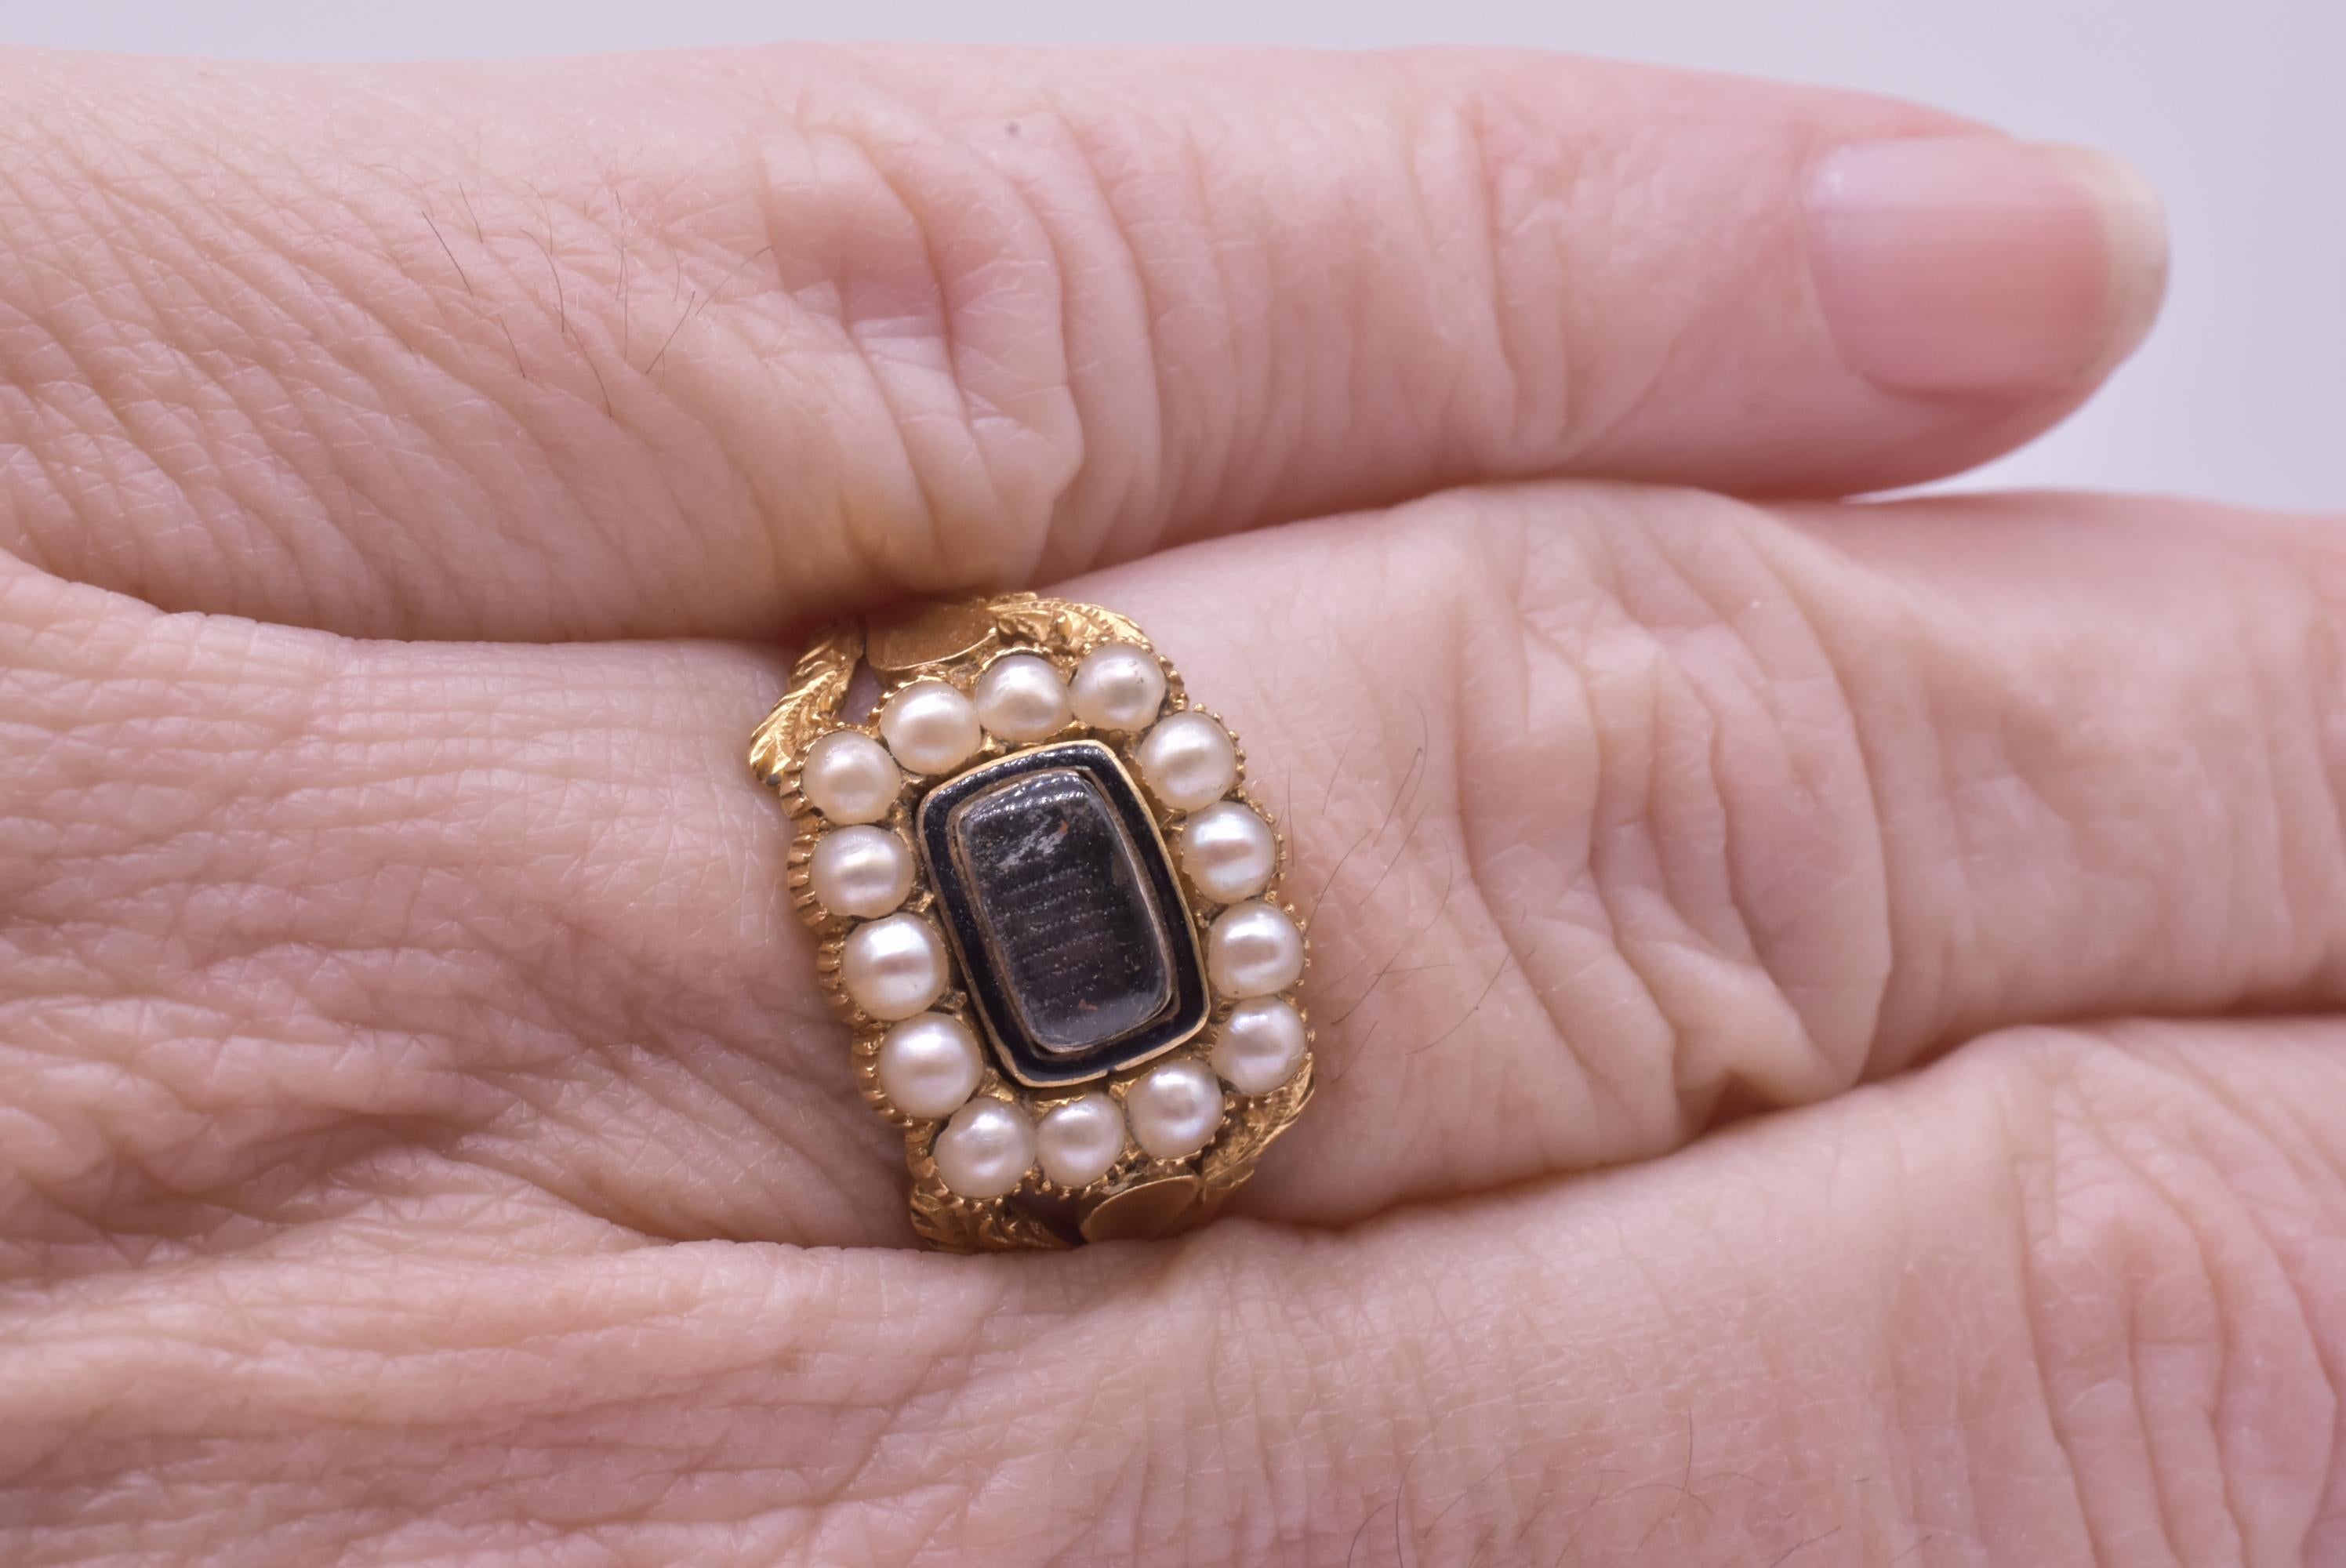 Lovely late Georgian 22 carat gold ring that is hallmarked Birmingham 1833. The ring has a surround of of natural split pearls around a rectangular beautifully enameled border in black that surrounds a plate of crystal which covers the beautiful